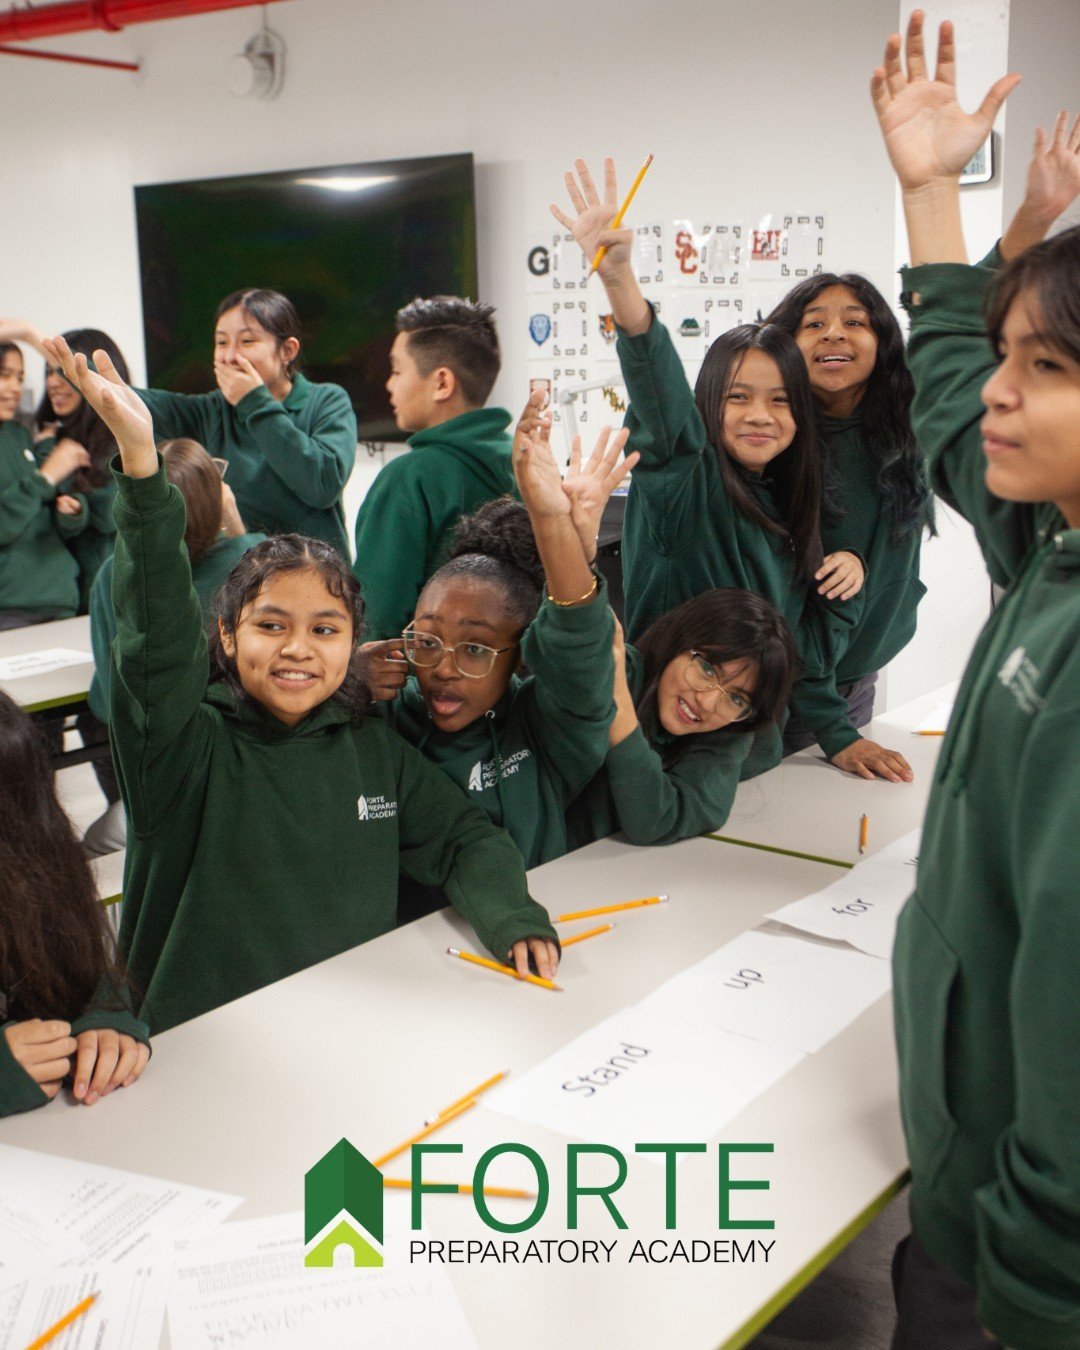 Forte Prep: A launchpad for your child's dreams. Aim high, soar higher! 

We provide the tools and support to help our students excel in academics and beyond 🚀
.
.
.
Forte Prep: Una plataforma de lanzamiento para los sue&ntilde;os de tu hijo. 

&iex